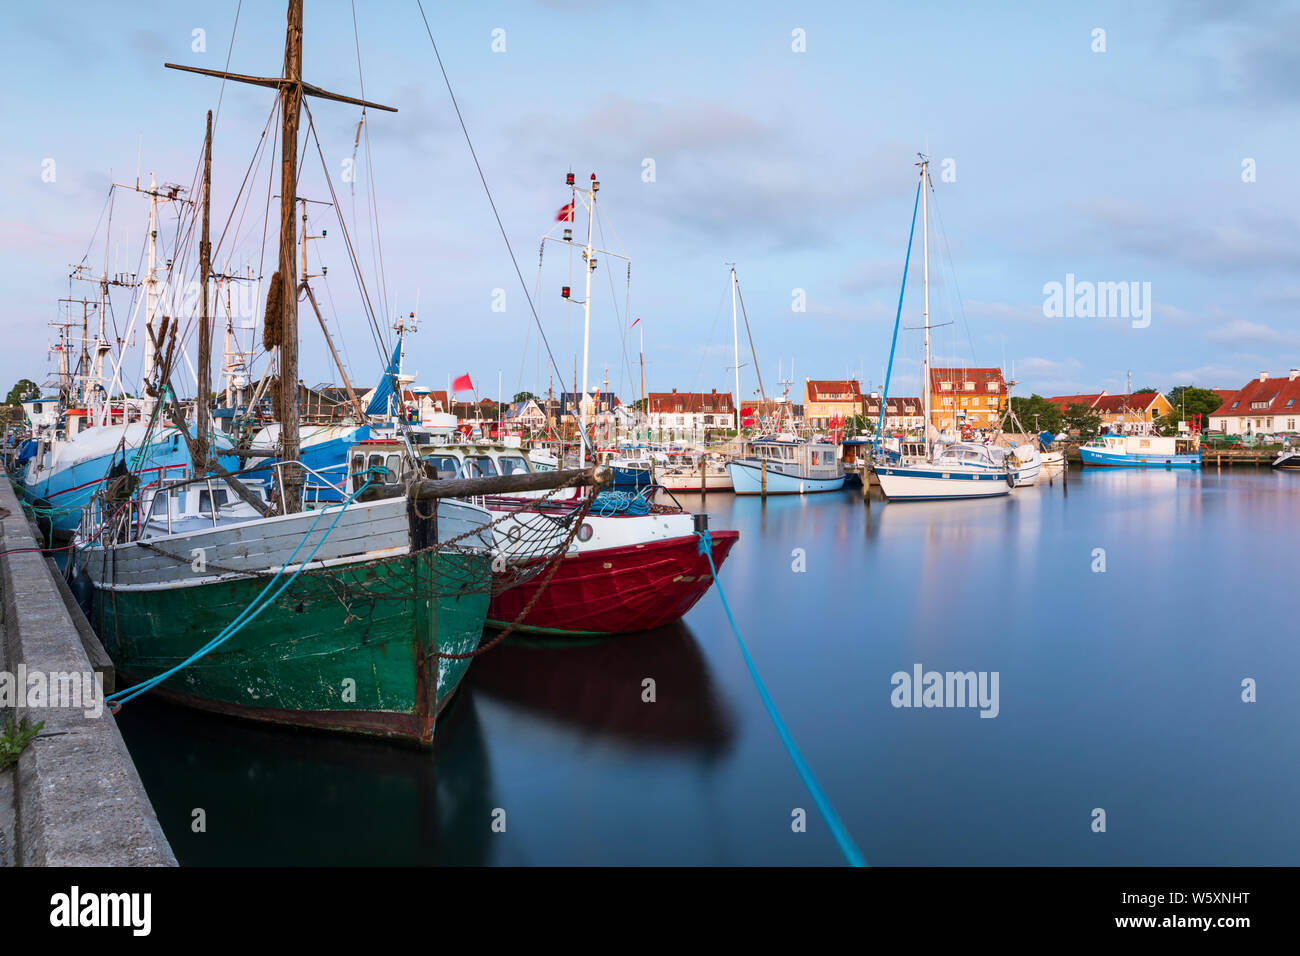 View over fishing boats and yachts in the fishing harbour, Gilleleje, Region Hovedstaden, Zealand, Denmark, Europe Stock Photo